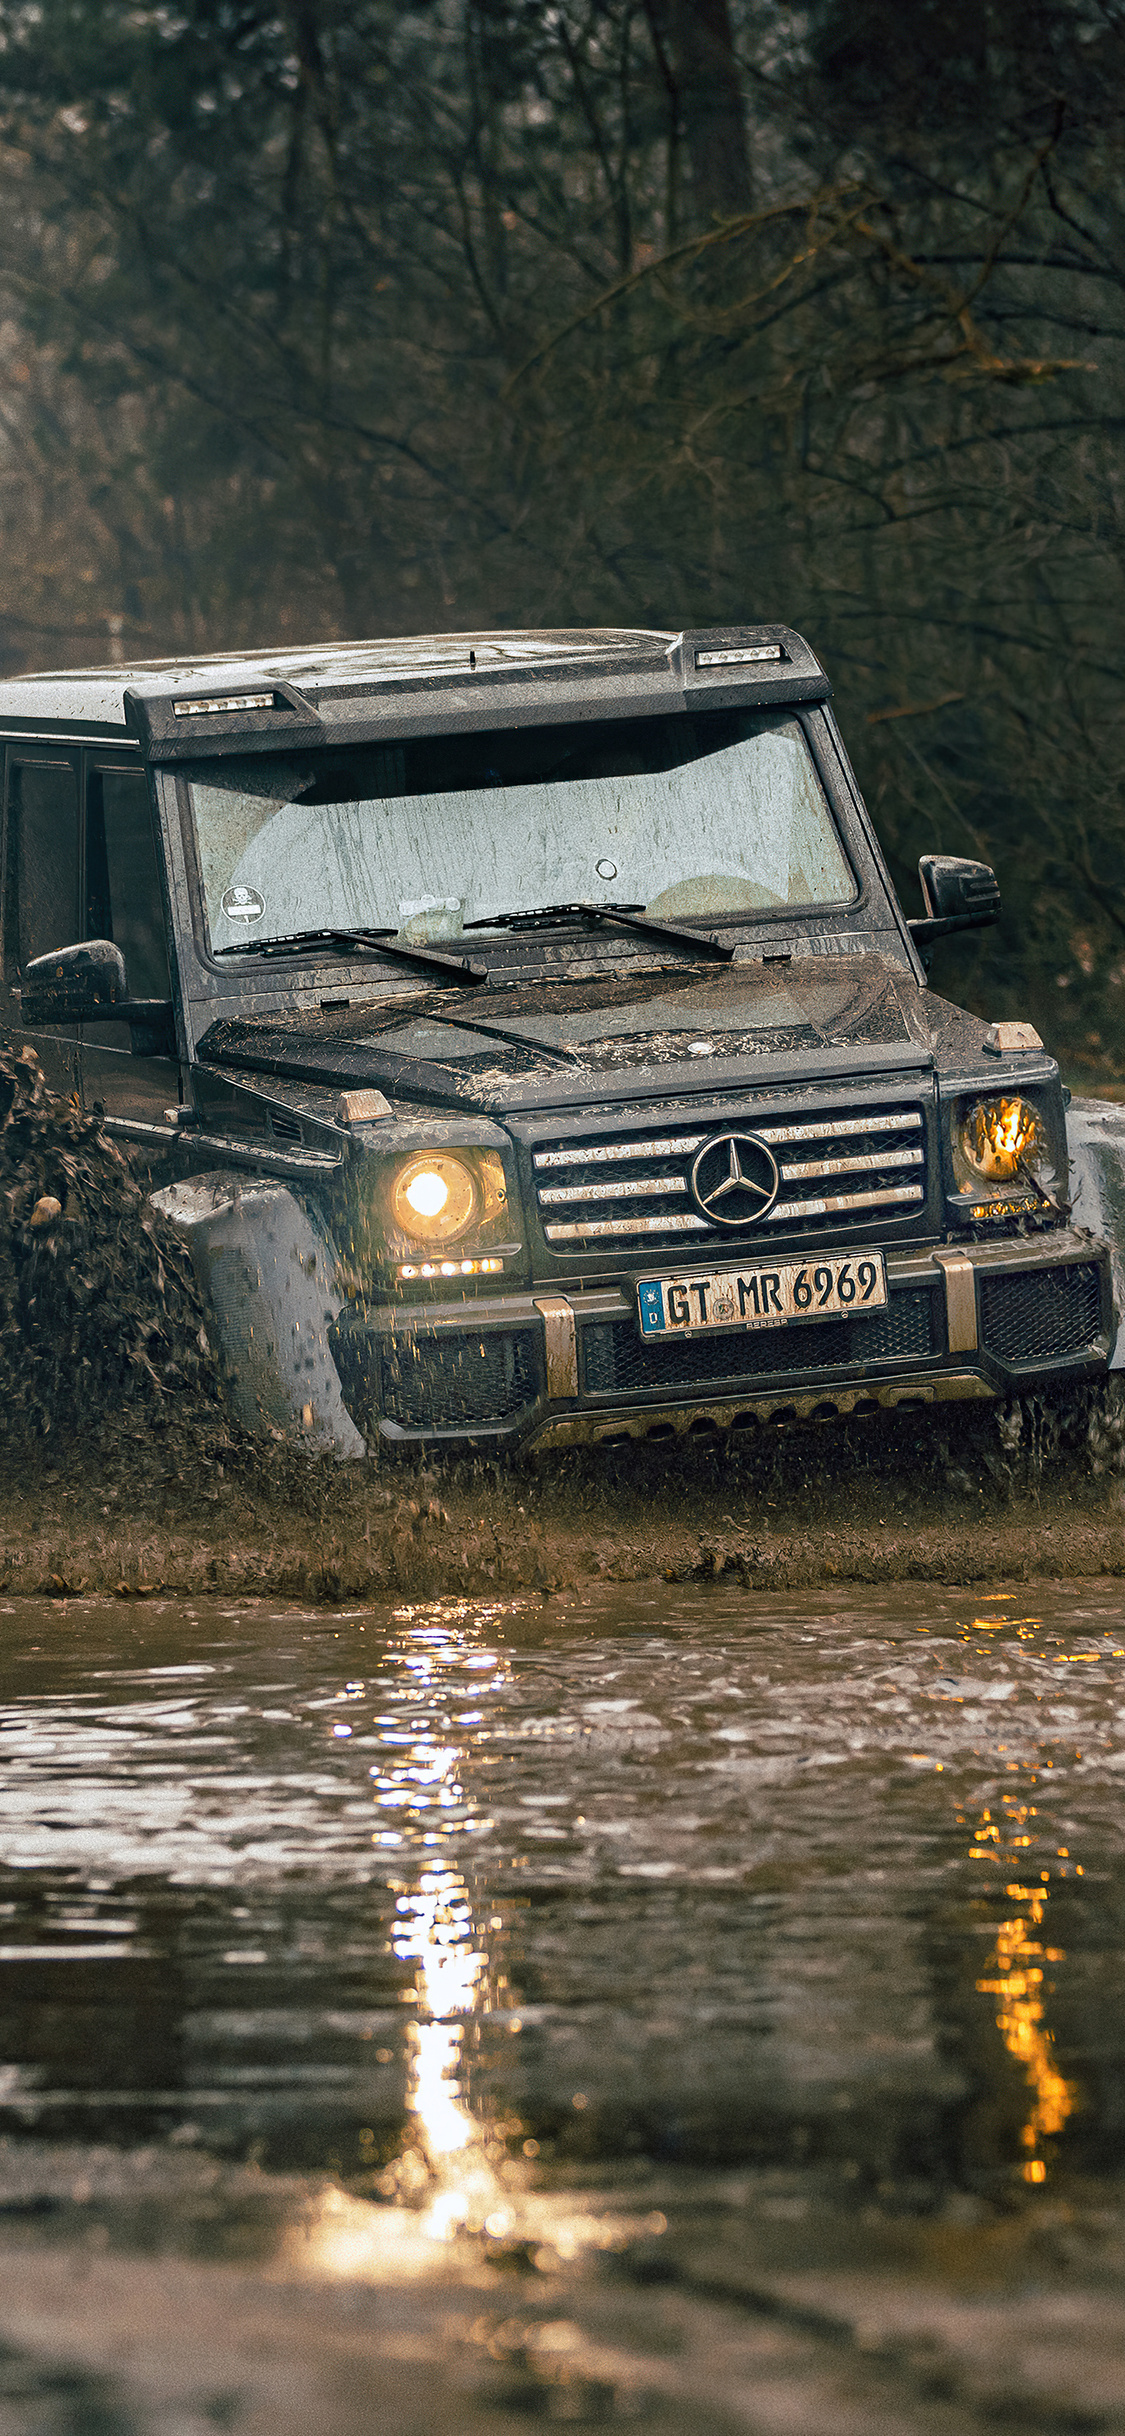 Off-road Driving: Mercedes G500 4x4 Offroading, Original G-wagen, 17.2 inches of ground clearance. 1130x2440 HD Background.